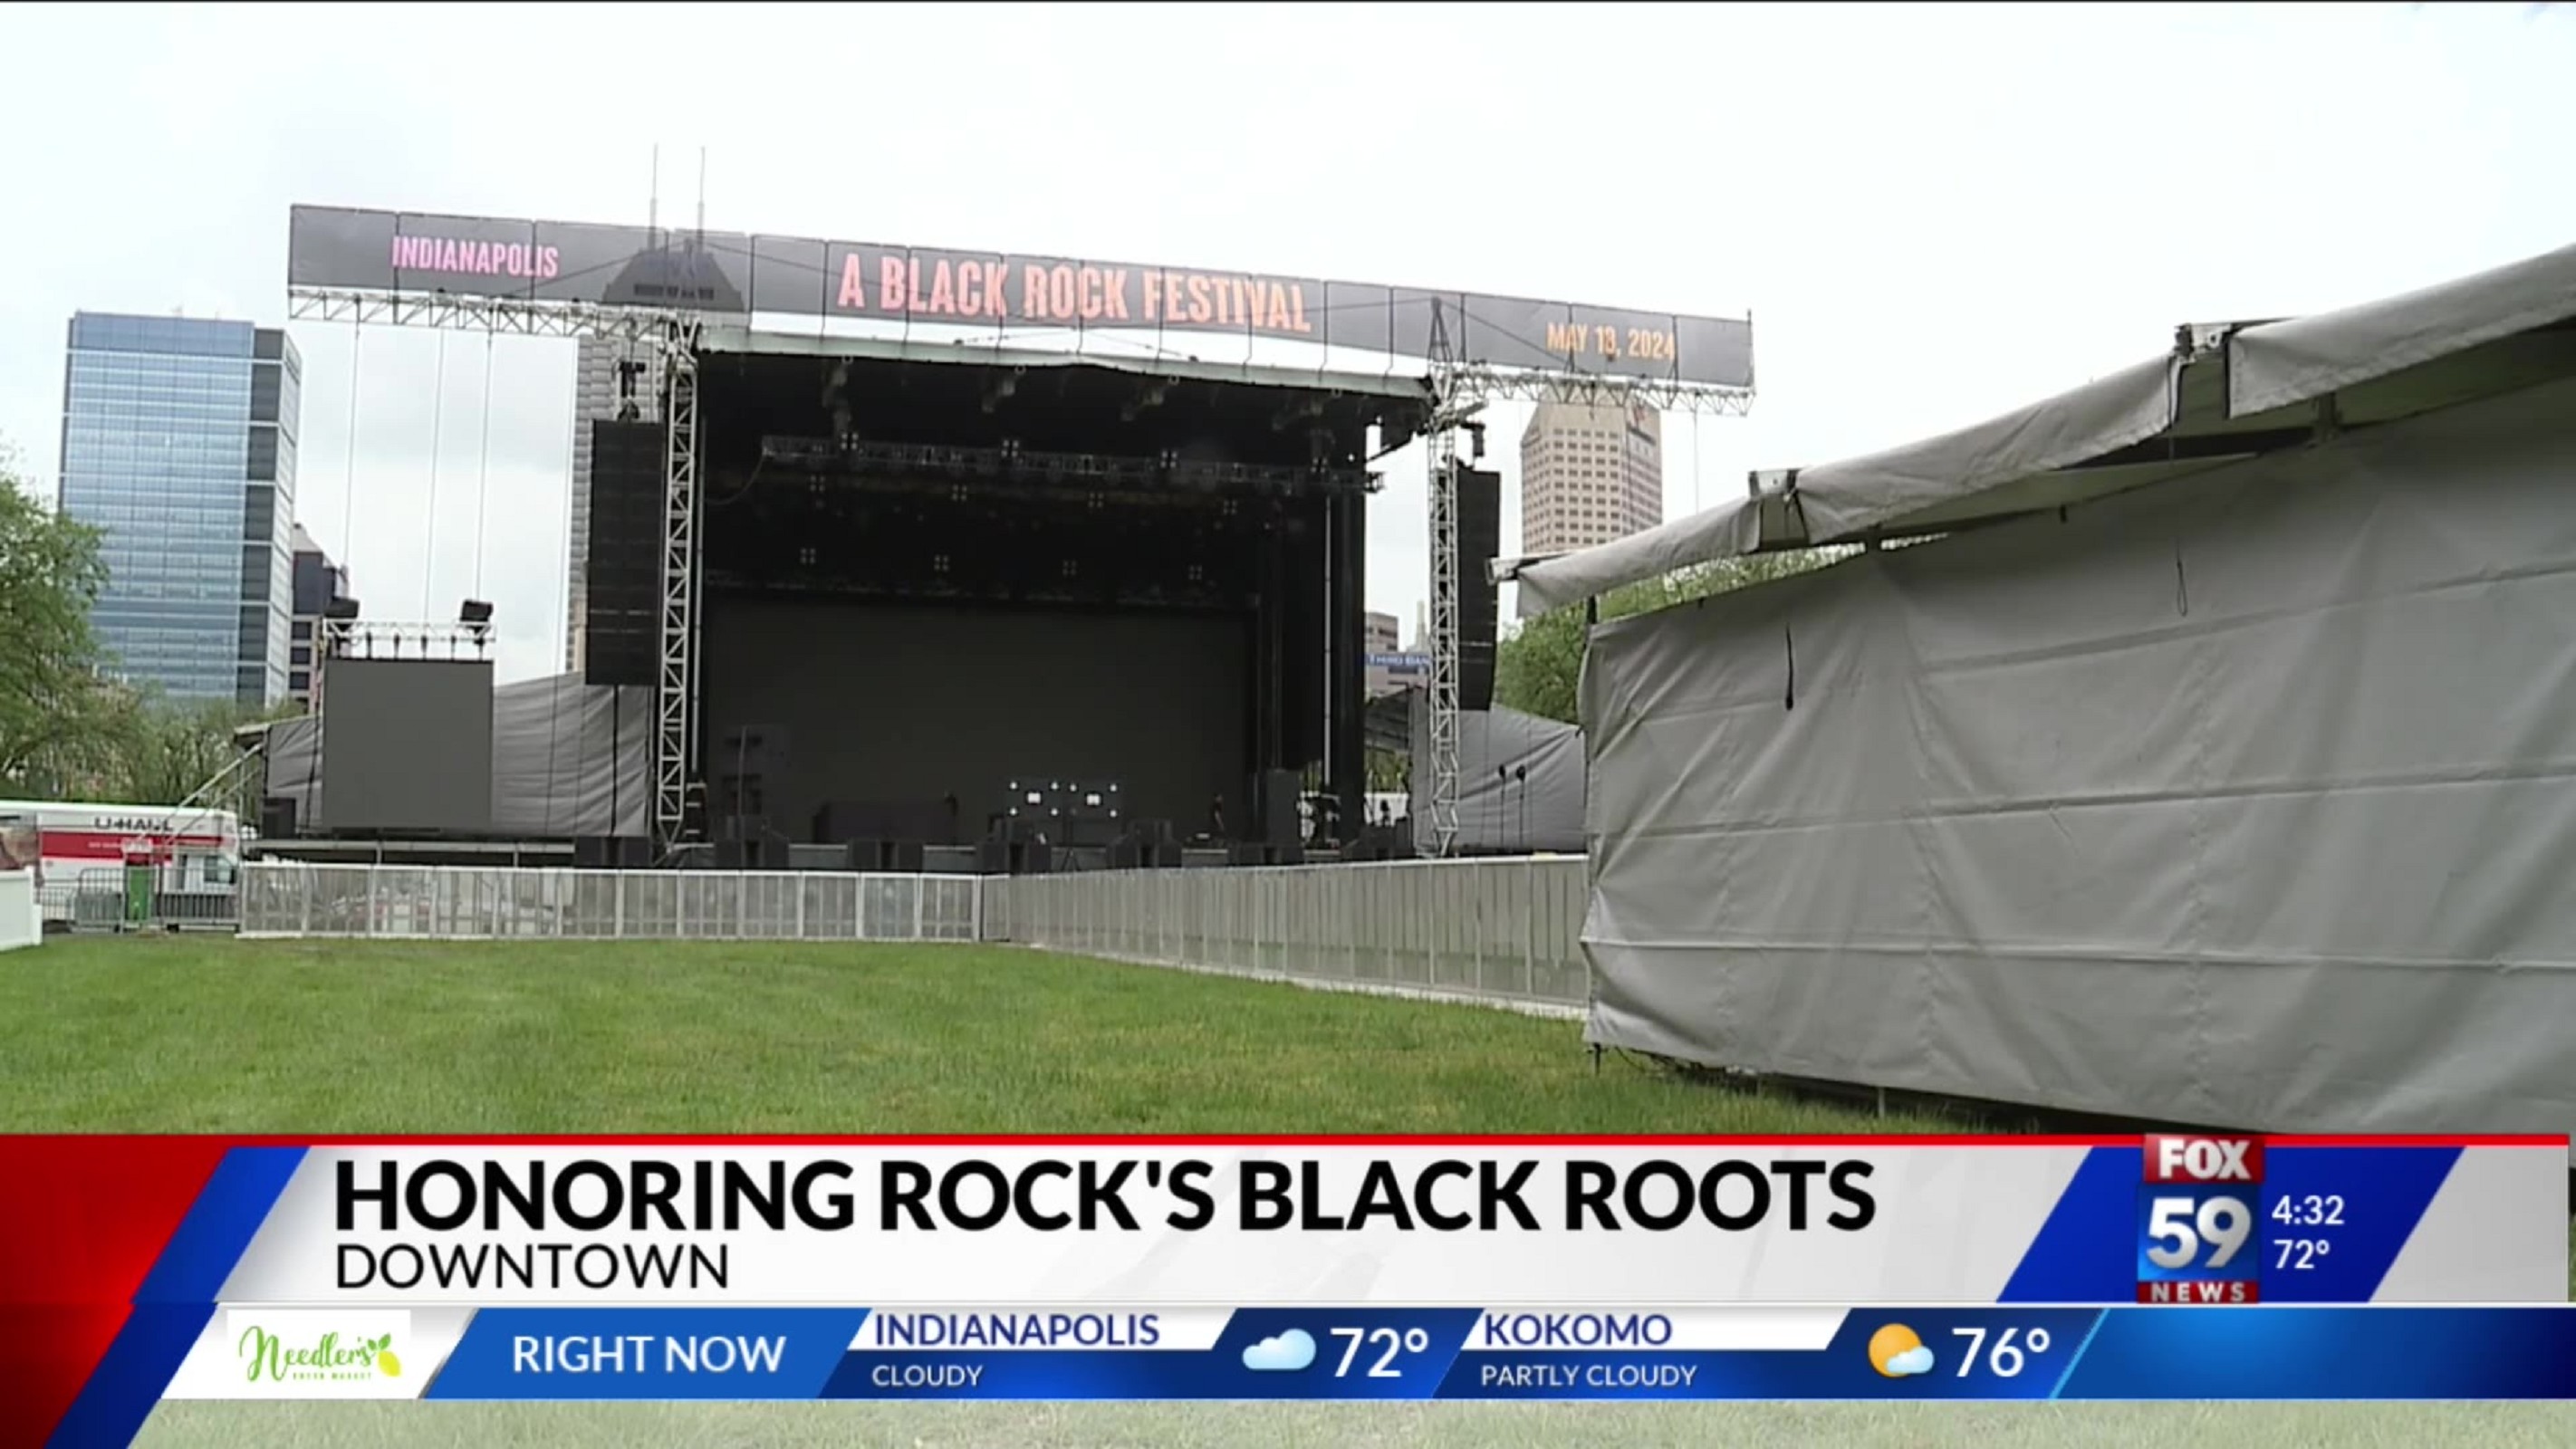 Festival to honor the impact Black musicians had on rock and roll music